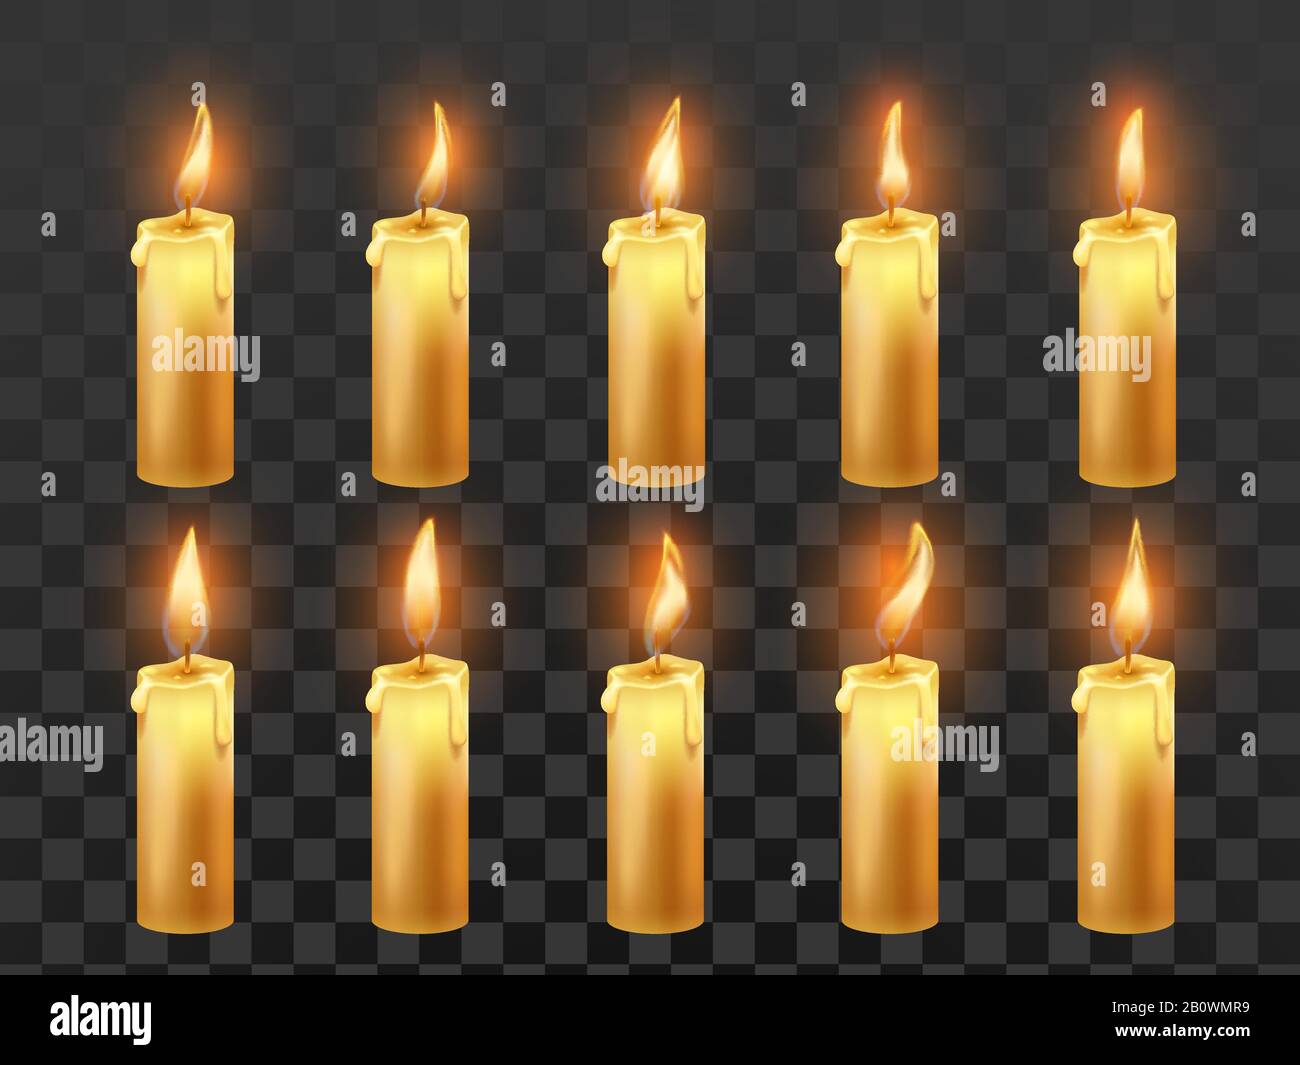 Candle fire animation. Burning orange wax candles, candlelight flame and animated fire flames isolated realistic vector symbol Stock Vector